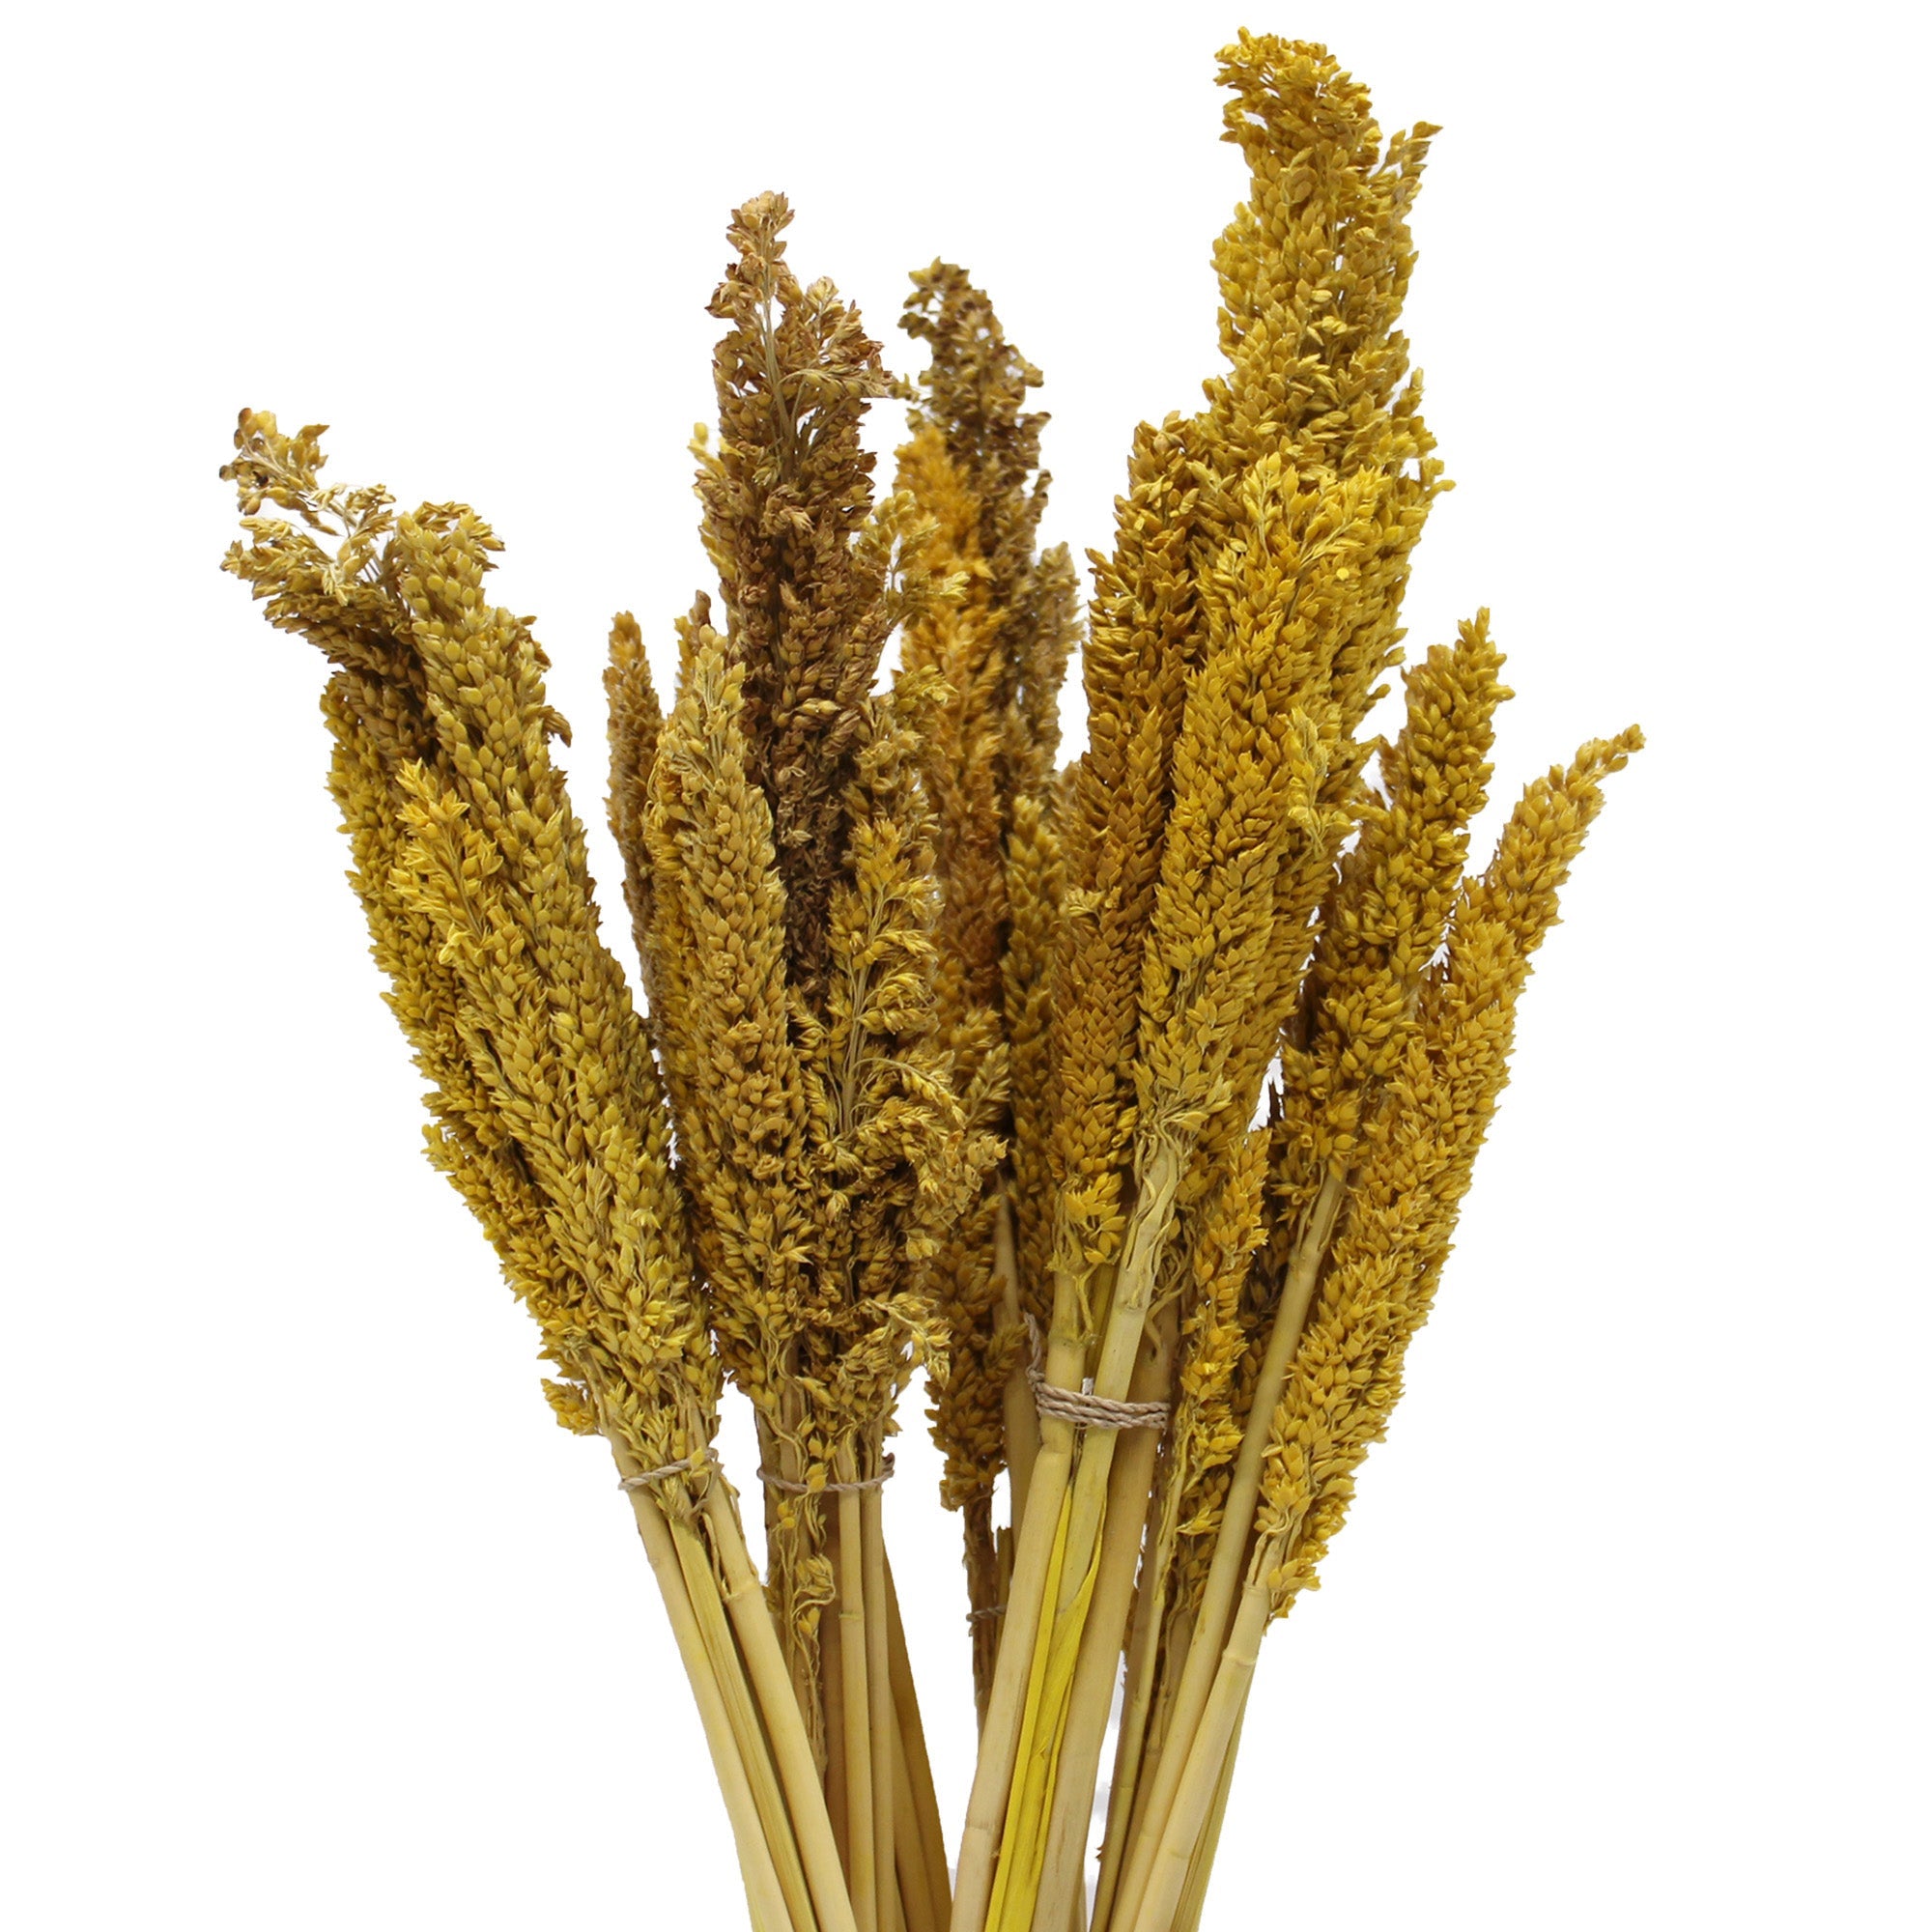 View Cantal Grass Bunch Amber information